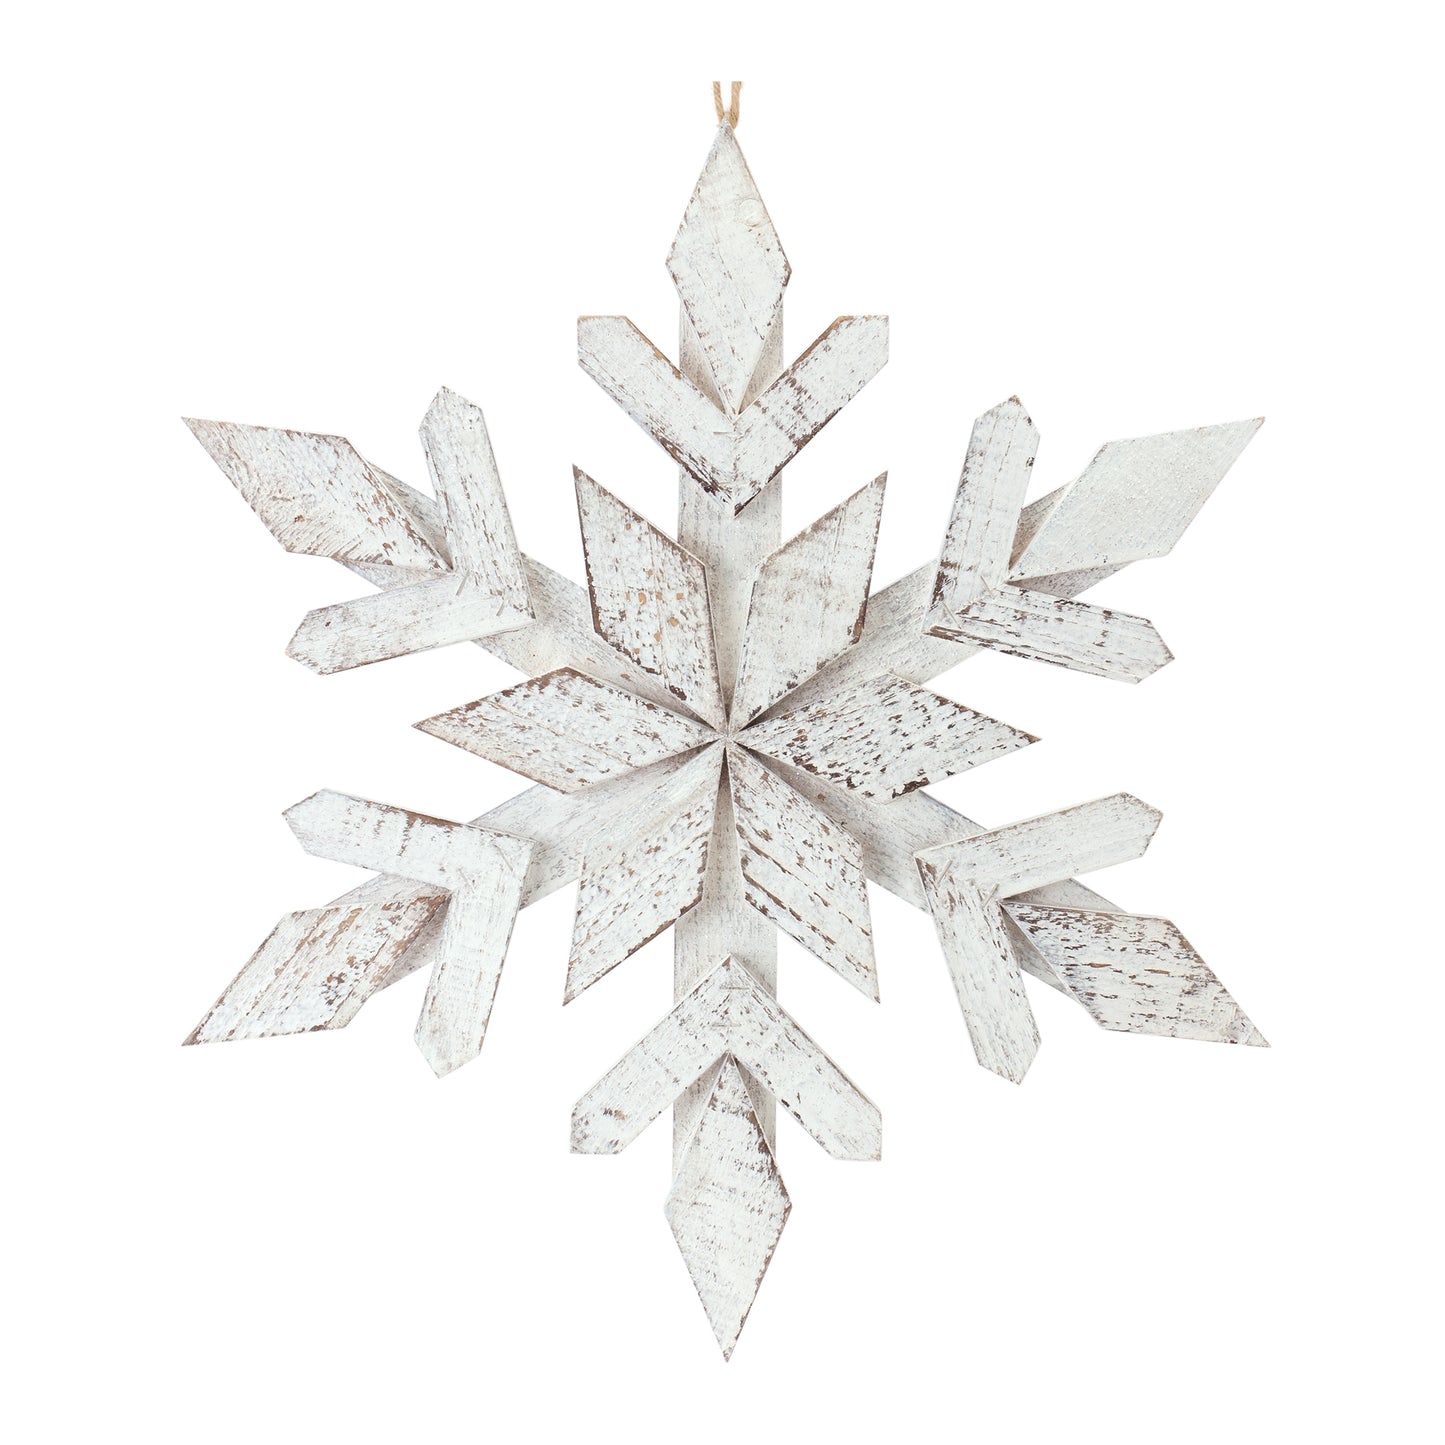 17.5"H Wooden Snowflake Ornament